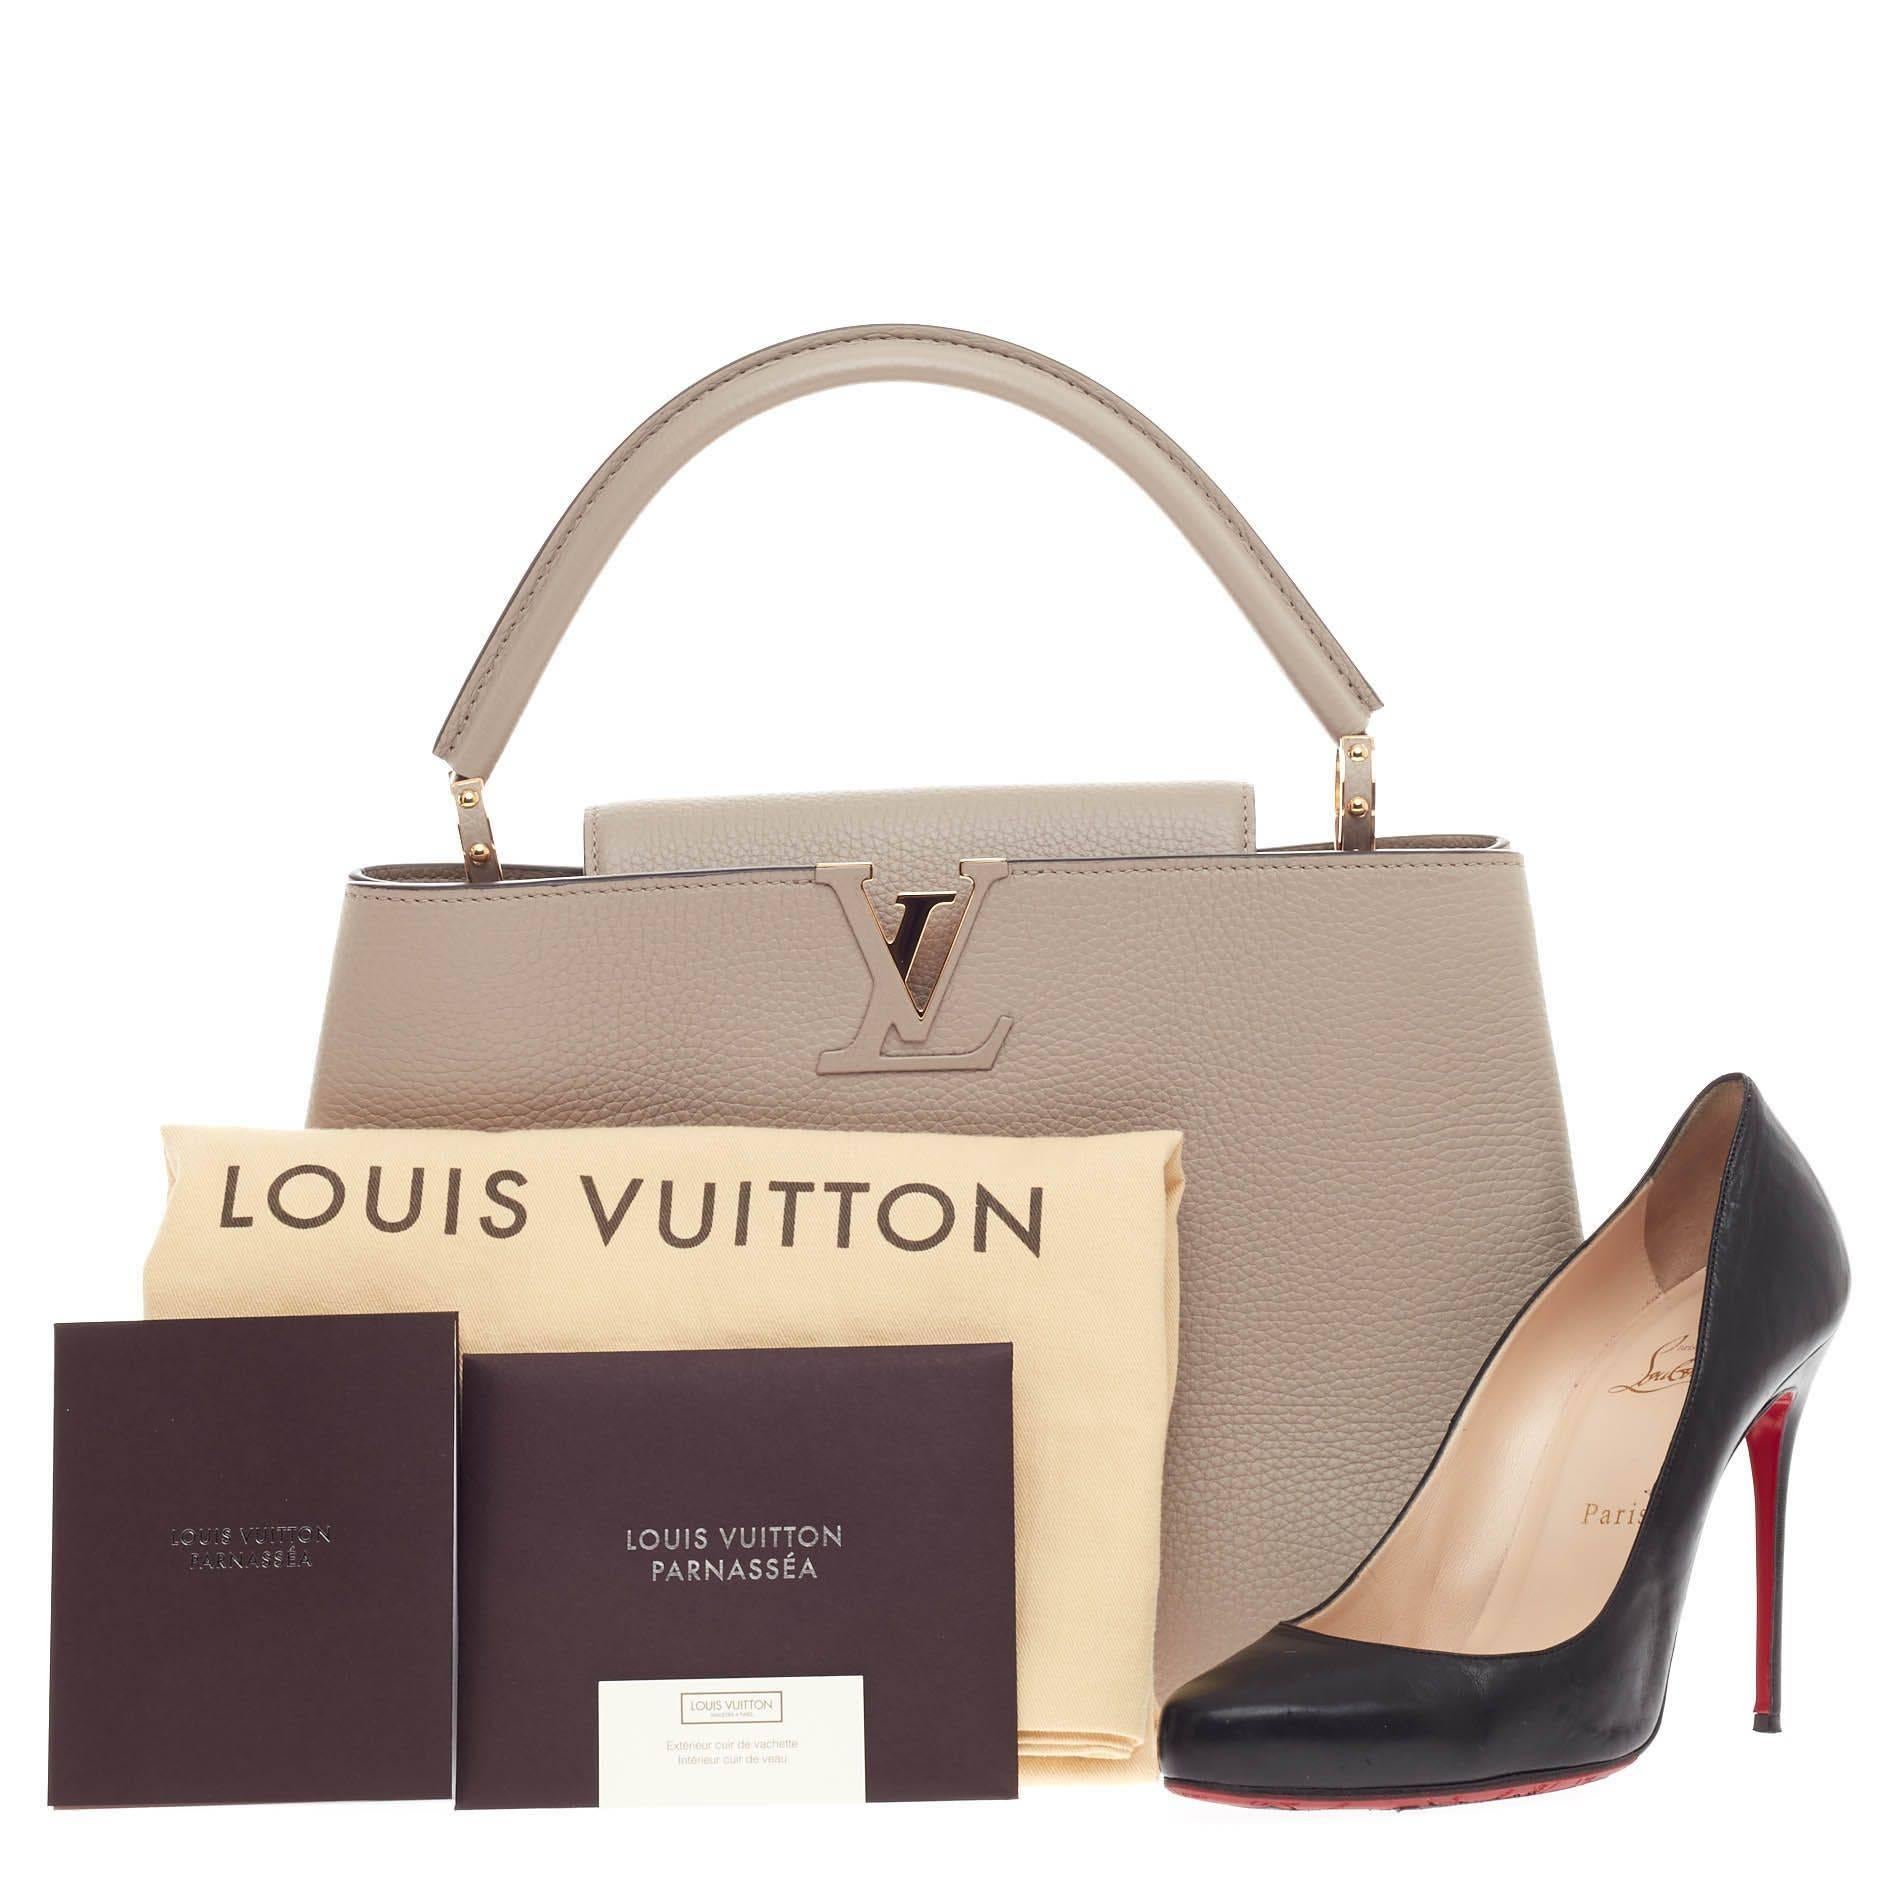 This authentic Louis Vuitton Capucines Leather MM is sophisticated and ladylike luxurious bag from the brand's Fall 2013 Collection inspired by its Parisian heritage. Crafted in galet beige taurillion leather, this chic, stand-out bag features a